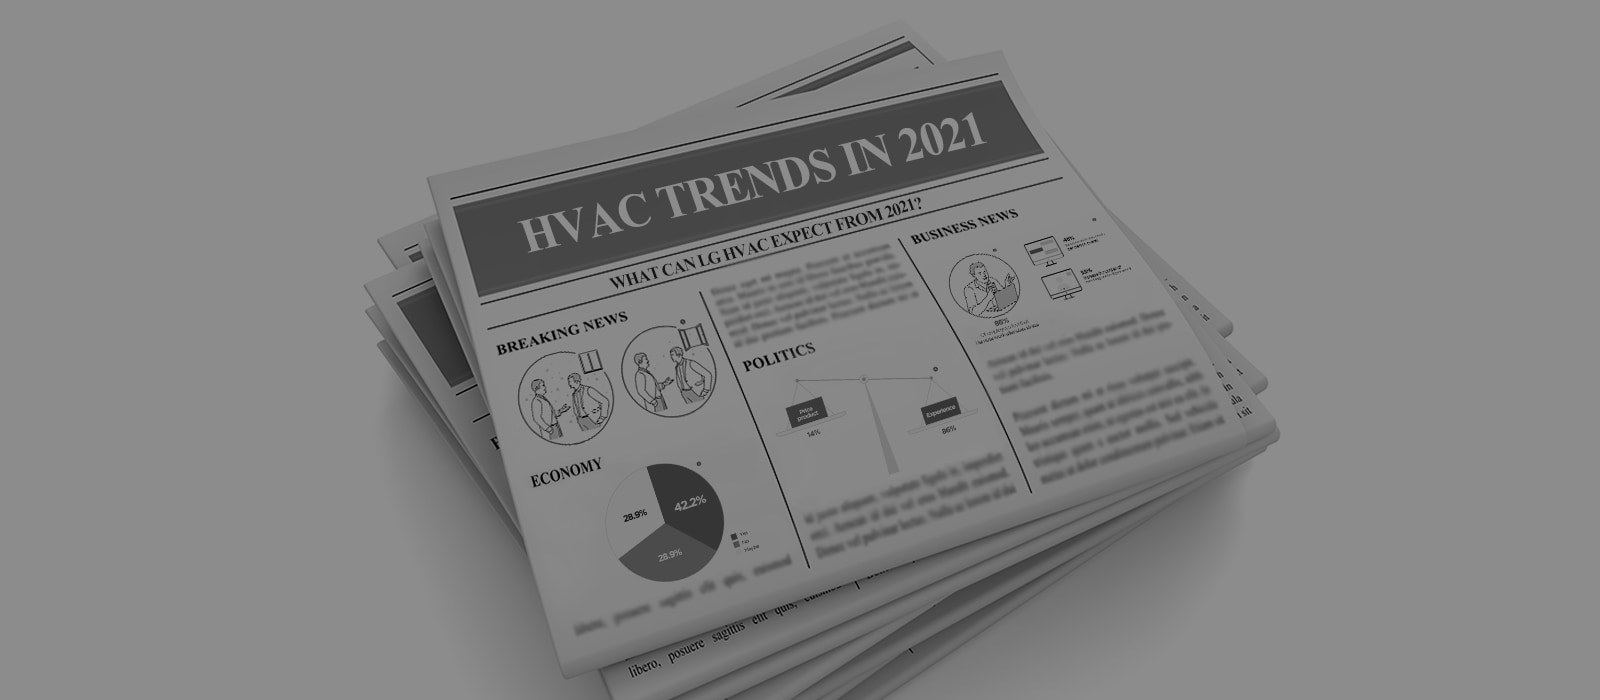 The piles of newspapers and the main article tells the trends of hvac in 2021.